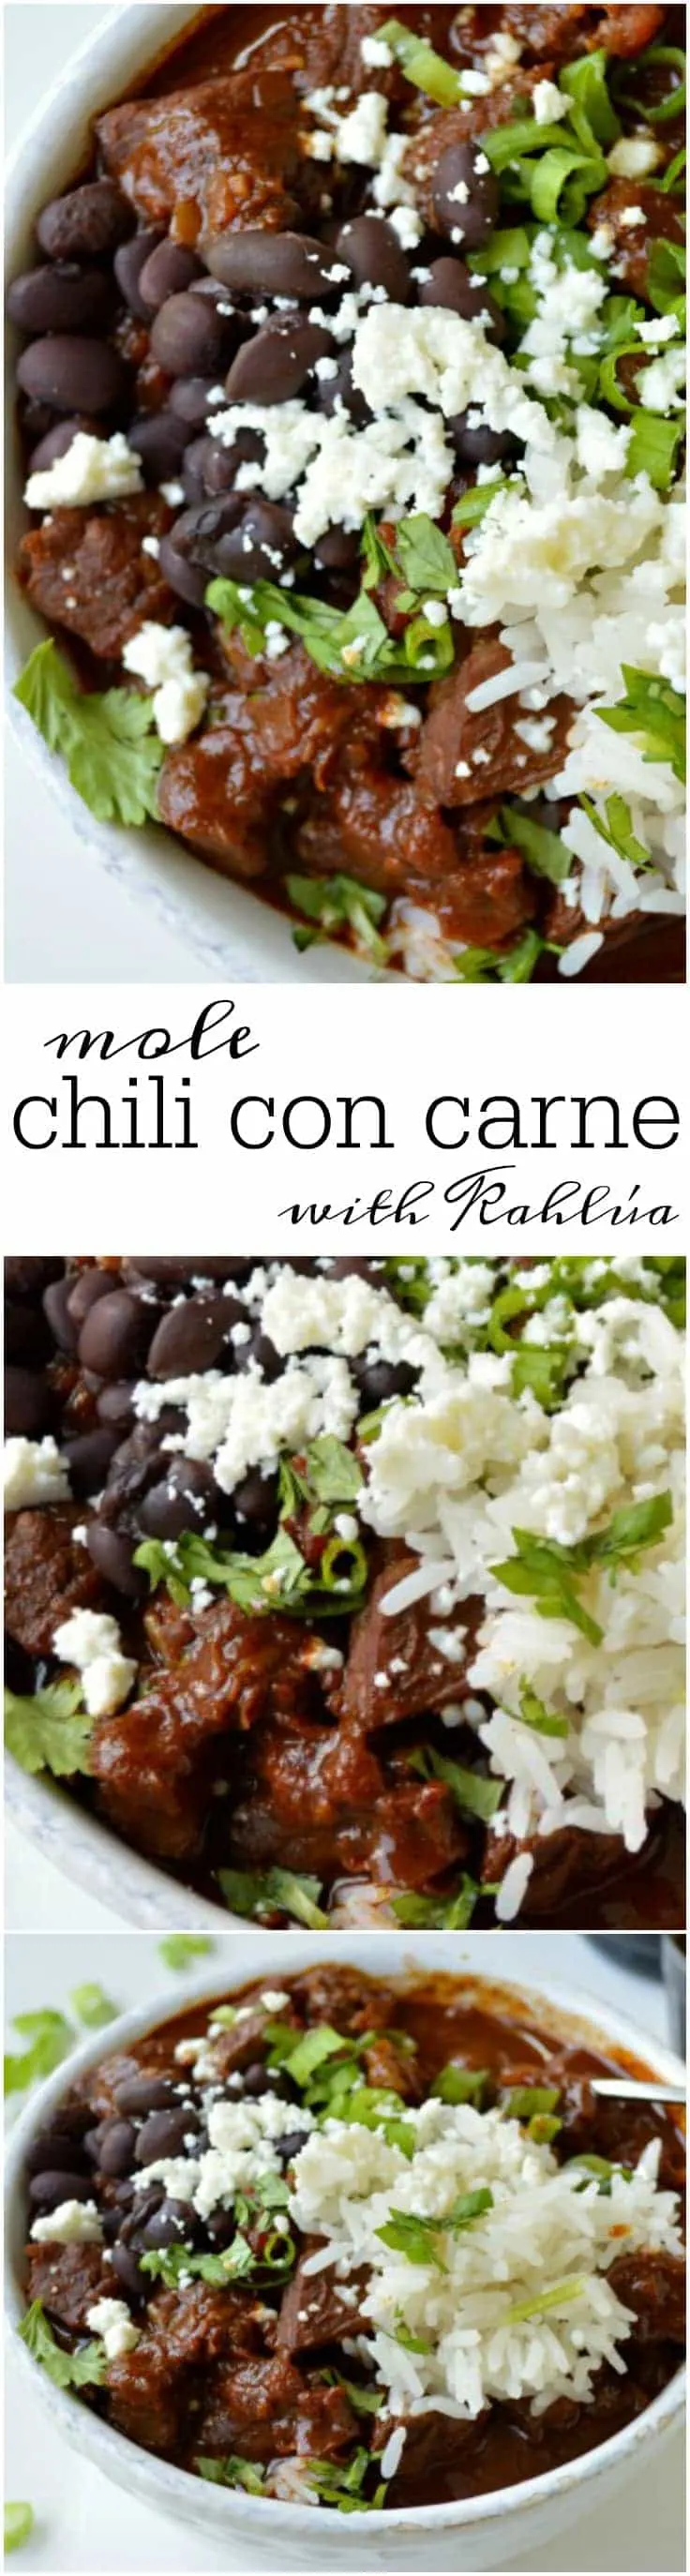 Tender beef, the perfect amount of spice, and a hint of dark chocolate make this Mole Chili con Carne THE BEST chili recipe!